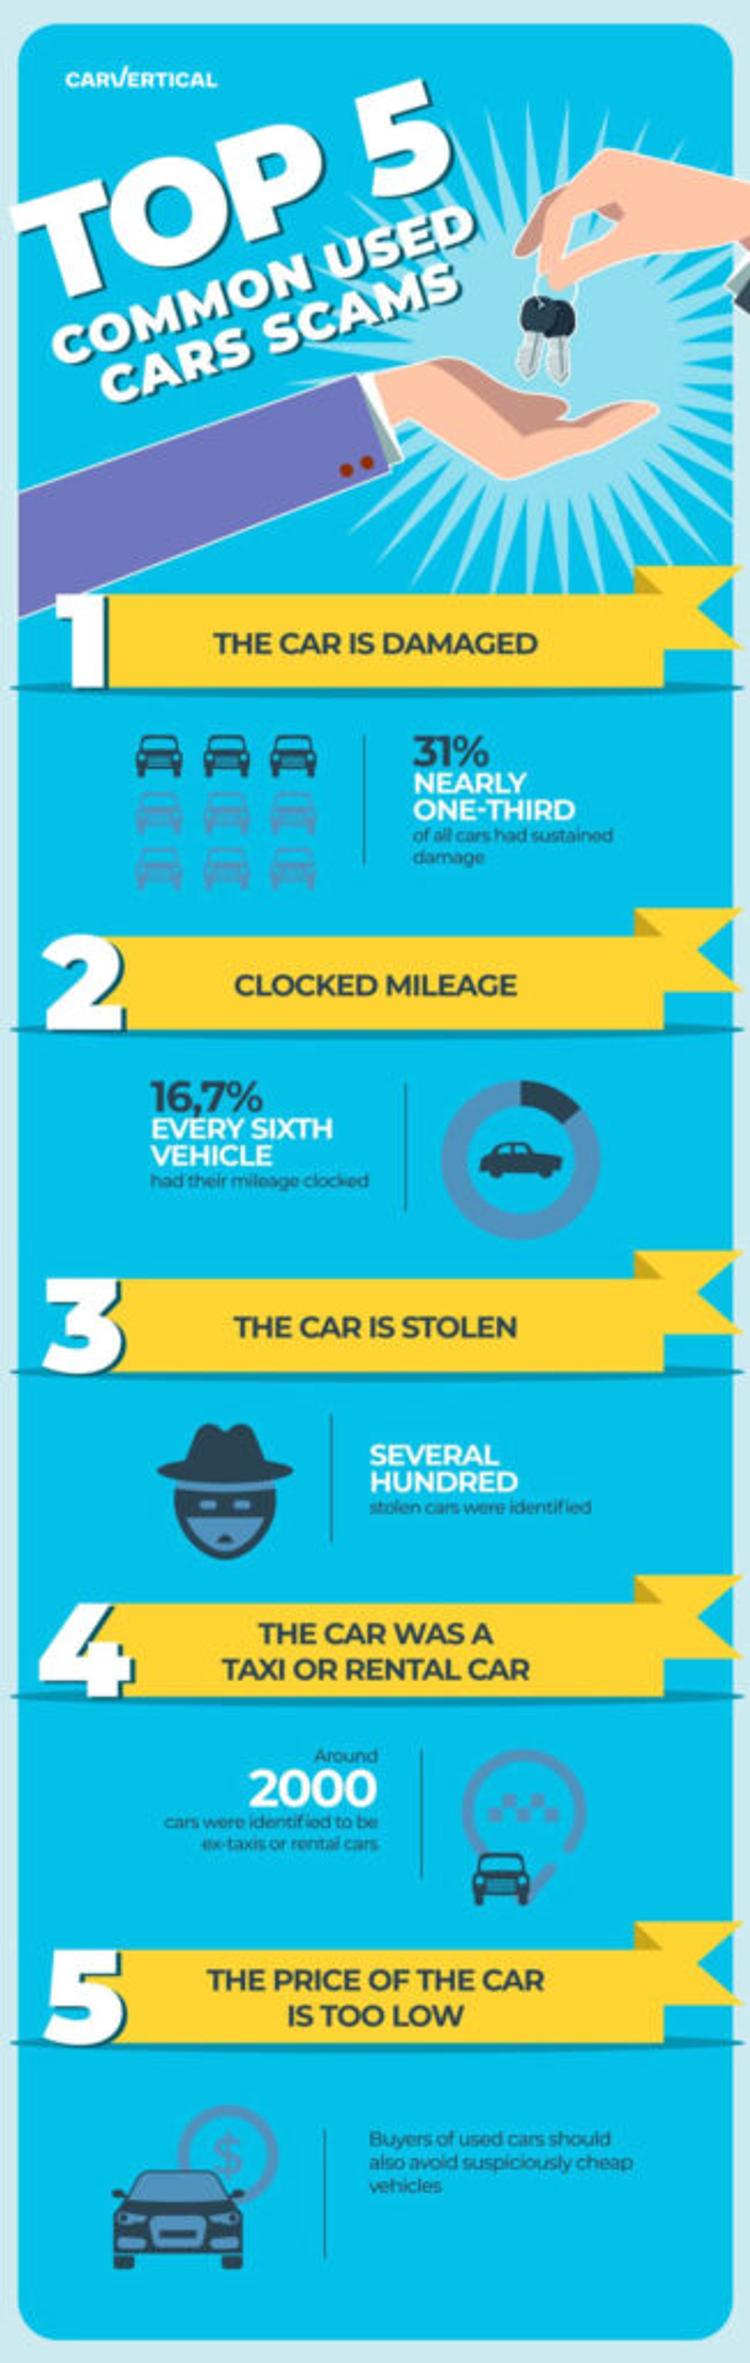 Top 5 common used car scams